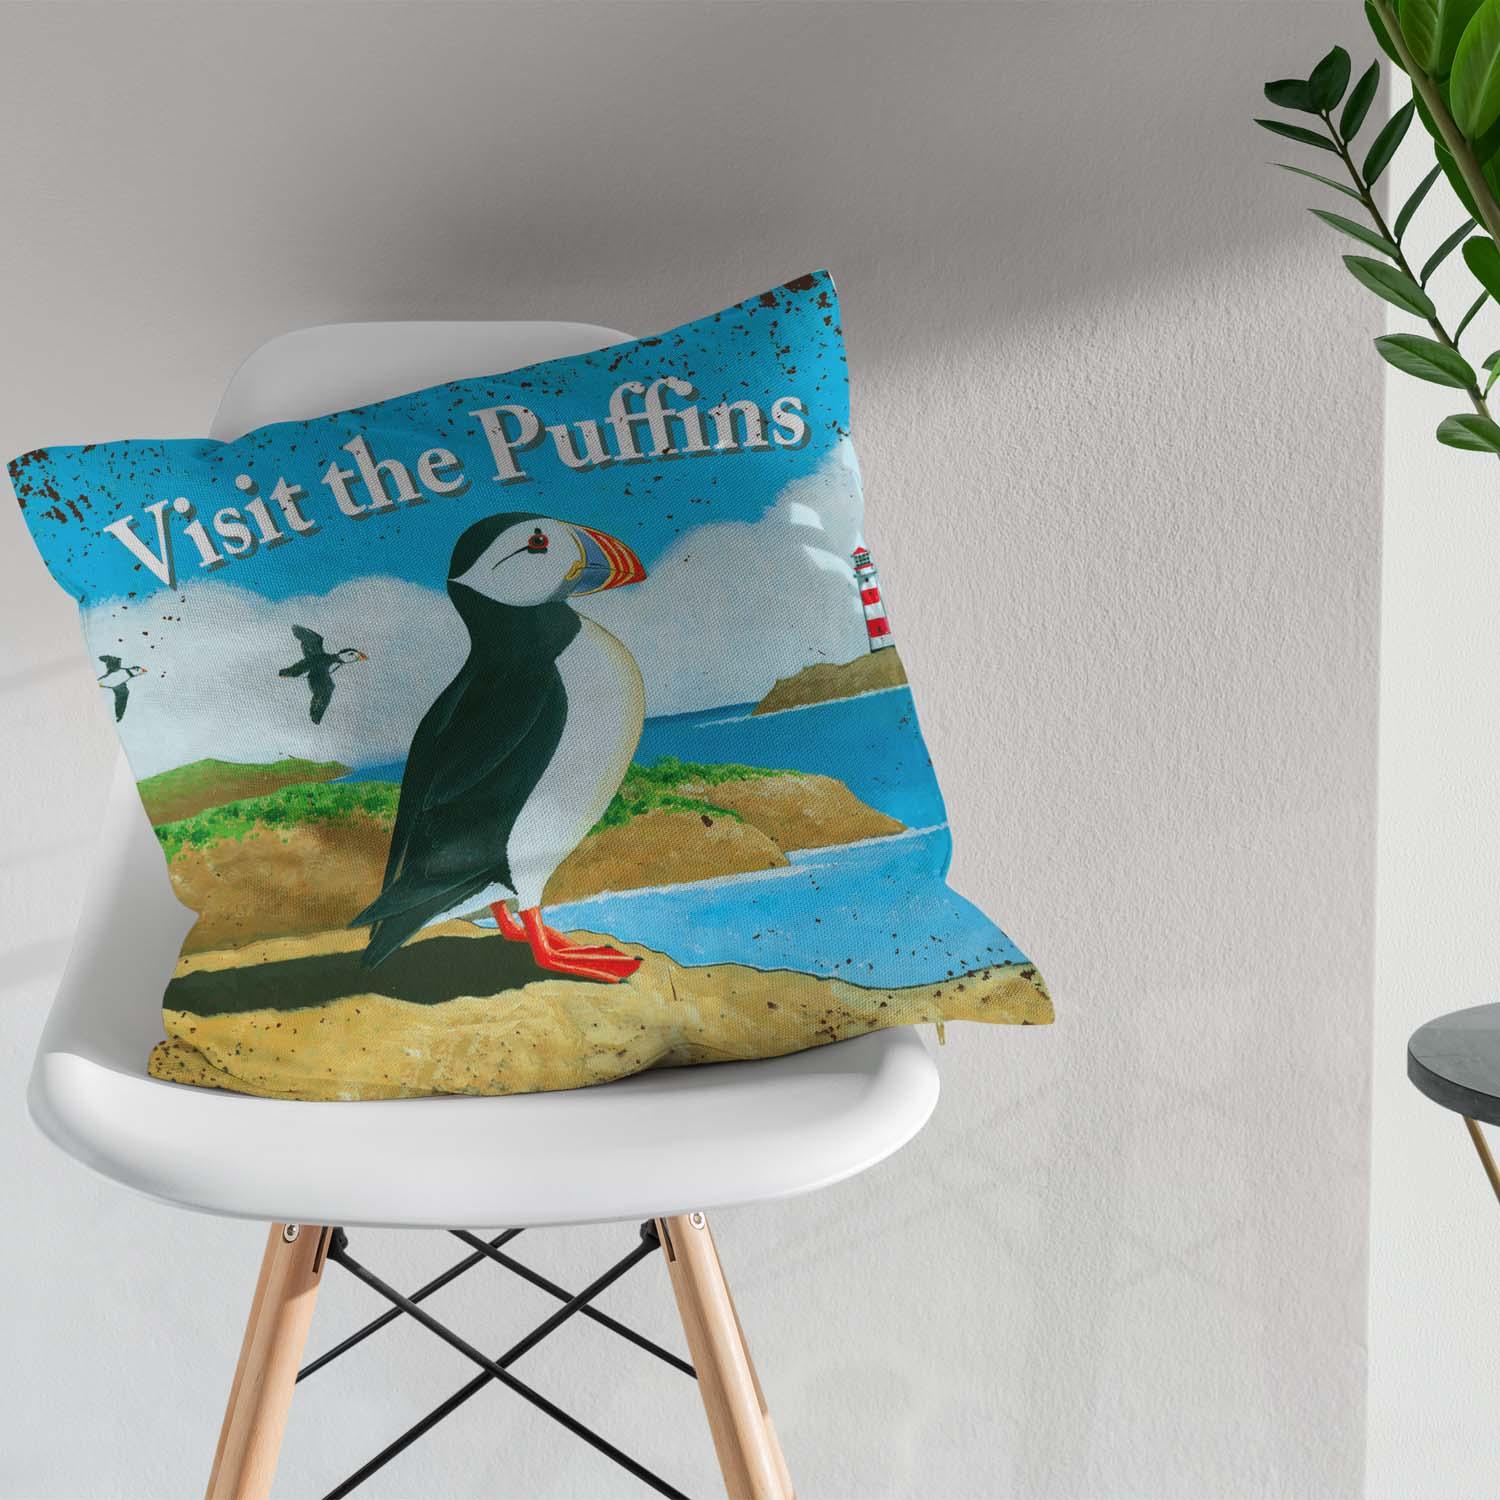 Visit The Puffins - Martin Wiscombe - Art Print Cushion